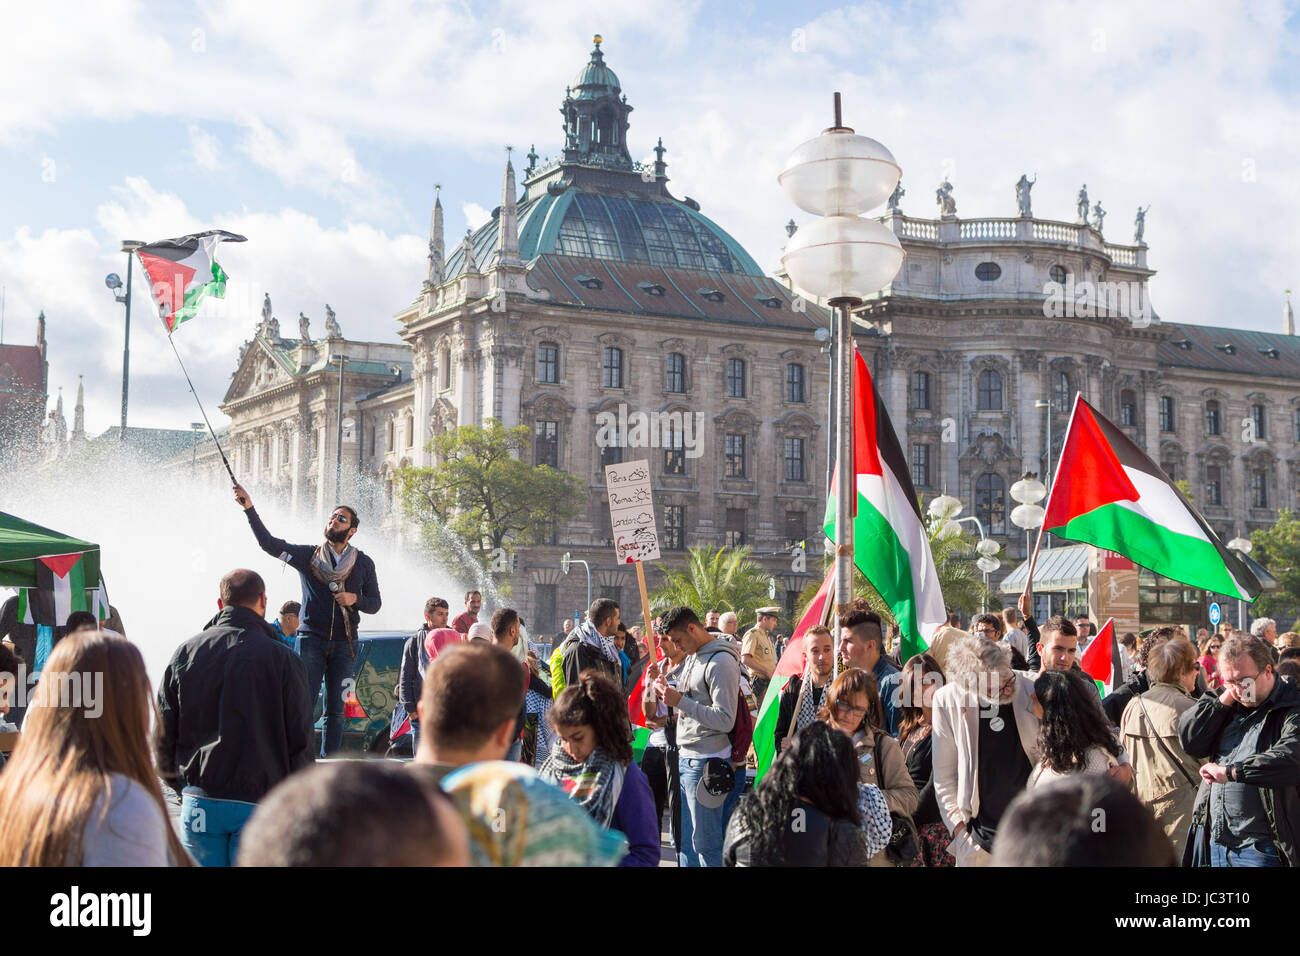 MUNICH, GERMANY - AUGUST 16, 2014: Peaceful demonstration for stopping Israel-Palestine conflict and ceasefire in Gaza Strip. Activist group calls negotiations between the warring parties. Stock Photo